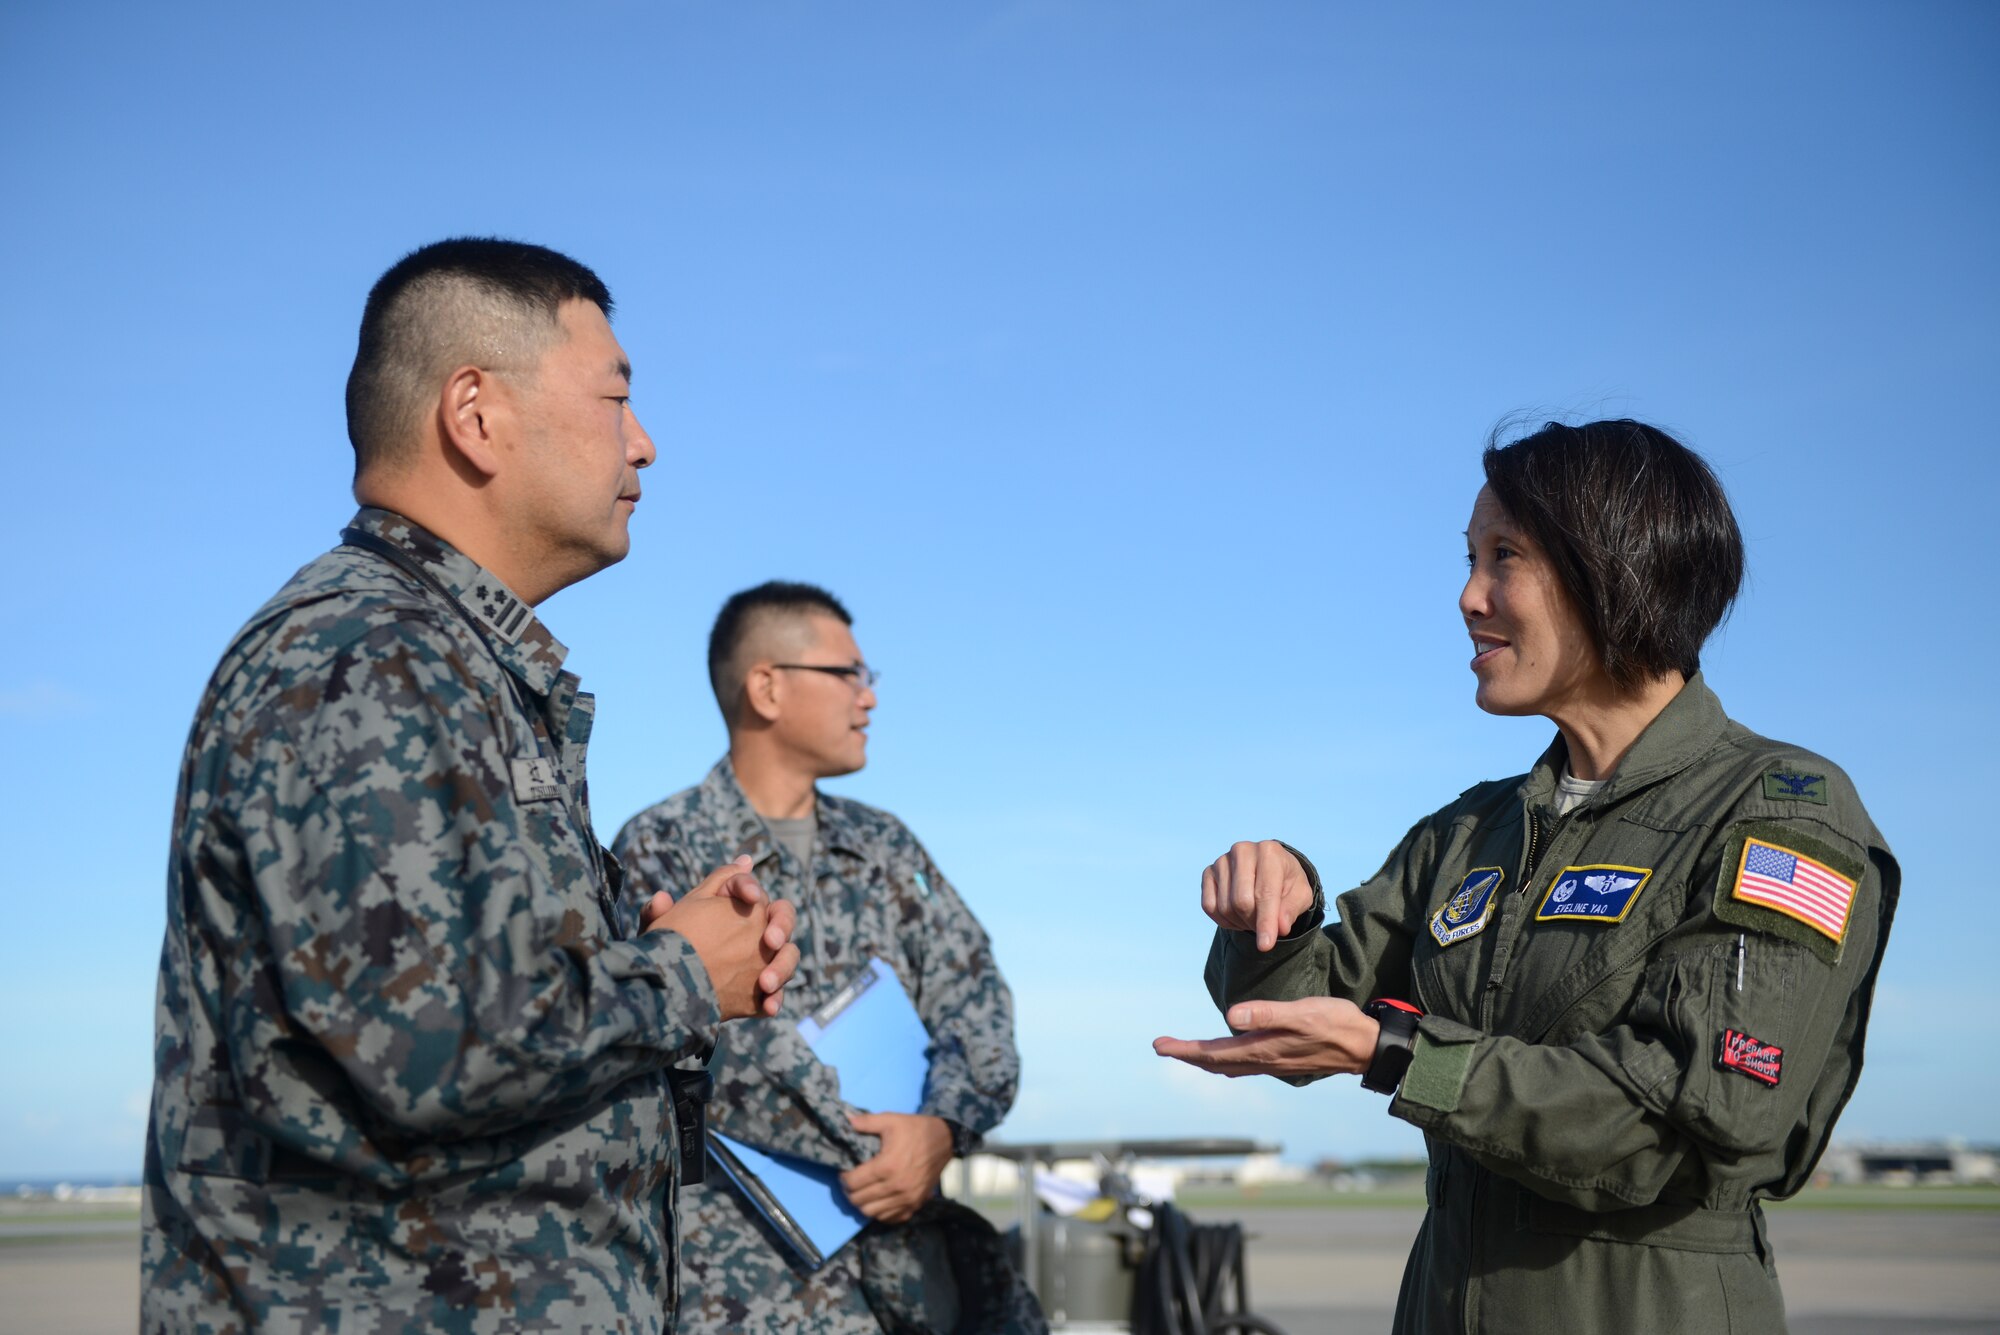 U.S. Air Force Col. Eveline Yao speaks with Japan Air Self-Defense Force Col. Tetsuya Tsujimoto before observing C-12 aeromedical evacuation training at Kadena Air Base, Japan, Sept. 24, 2014. Yao is the 374th Medical Group commander at Yokota Air Base, Japan, and Tetsuya is the commander of a JASDF Aeromedical Evacuation Squadron. U.S. military and JASDF often share military capabilities to improve their standing relationship. (U.S. Air Force photo by Staff Sgt. Cody H. Ramirez/Released) 